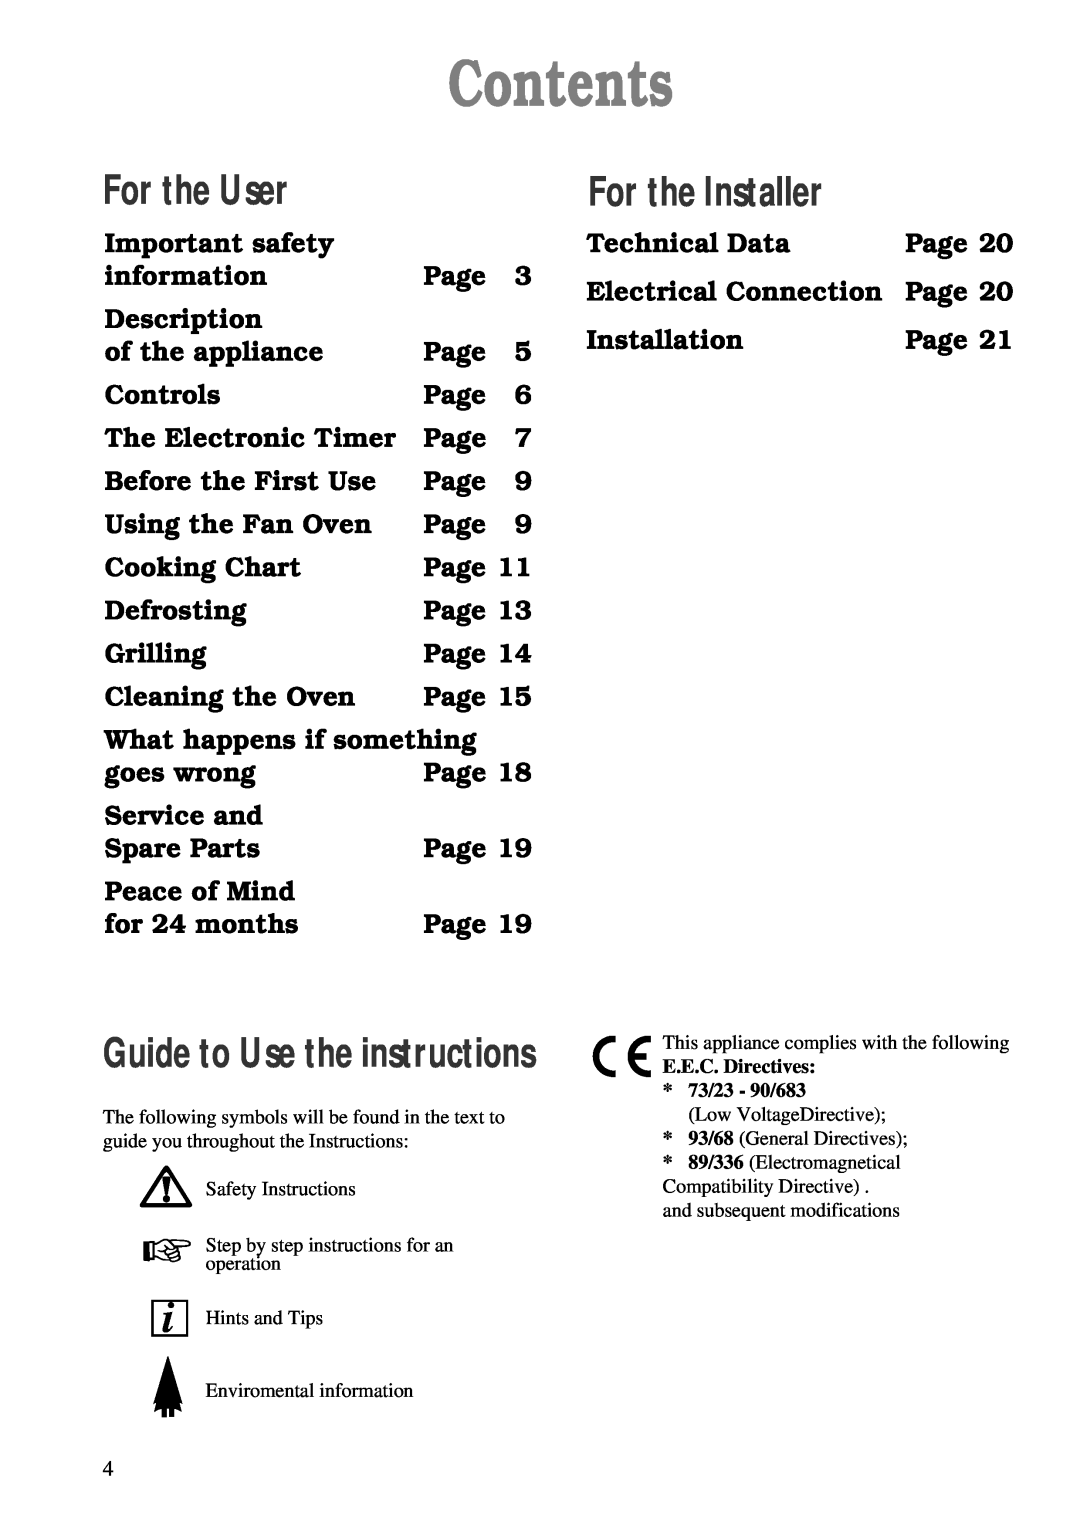 Zanussi ZBF 760 installation manual Contents, For the User, For the Installer, Guide to Use the instructions 